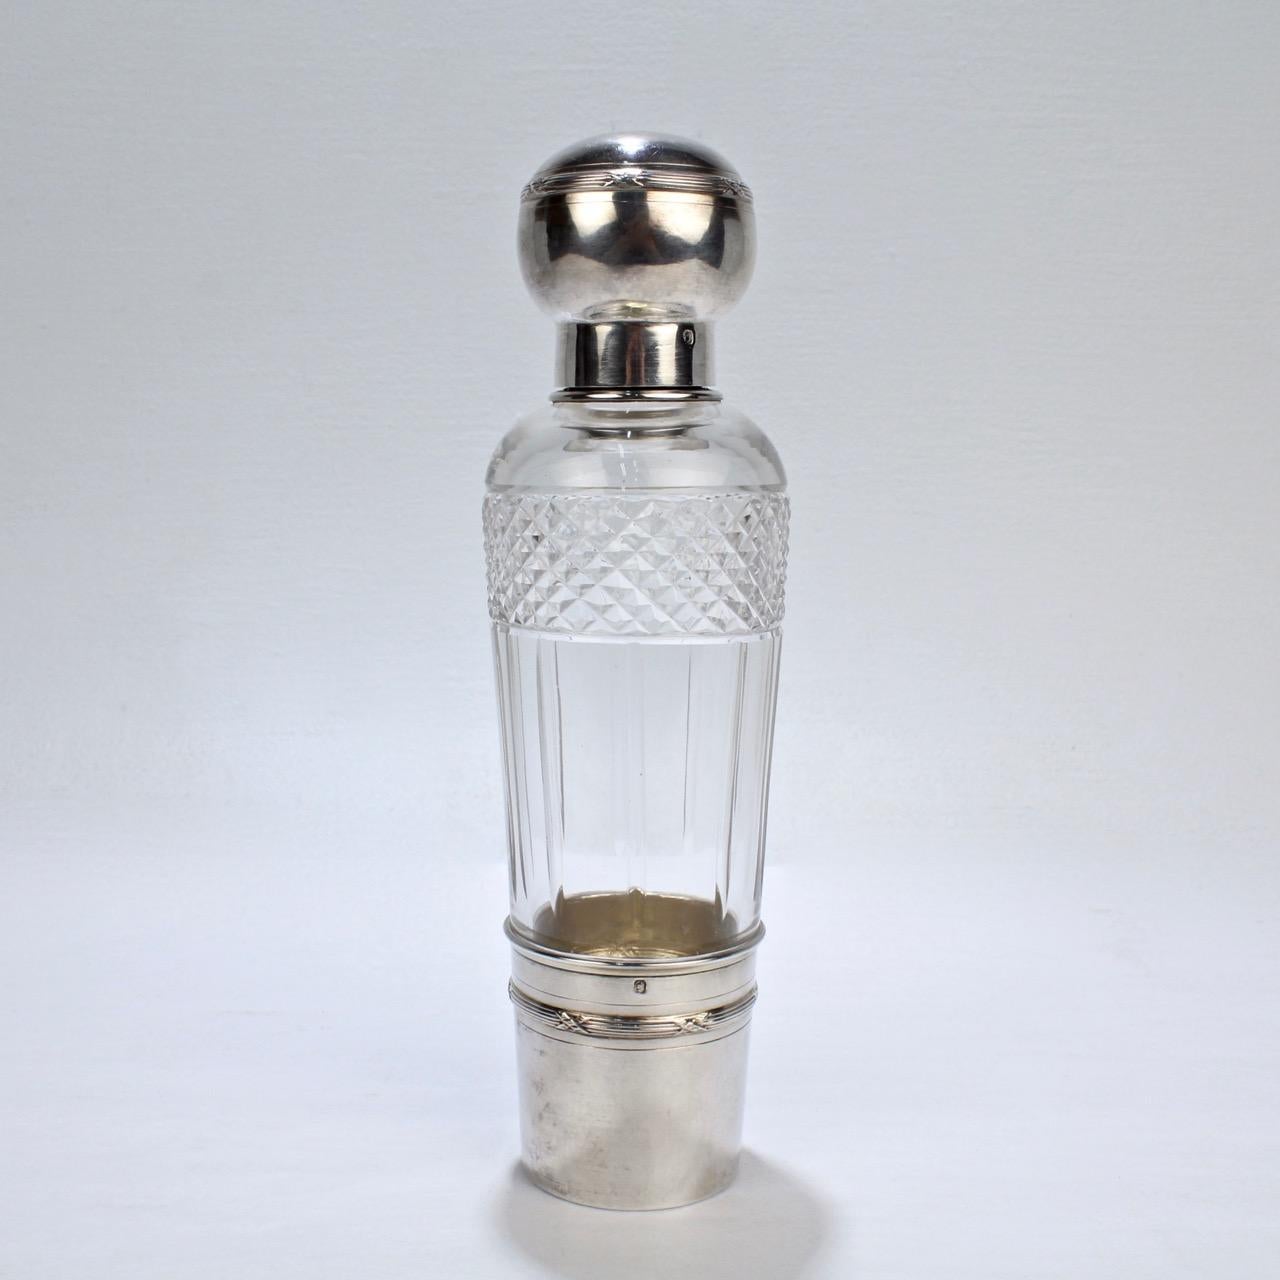 A very fine French Art Deco Flask by the Parisian jewelry maker and silversmith Albert Chambin.

In cut glass and sterling silver with a removable cup, twist-top cover, and glass stopper.

The silver hallmarked with a Medusa's head for silver